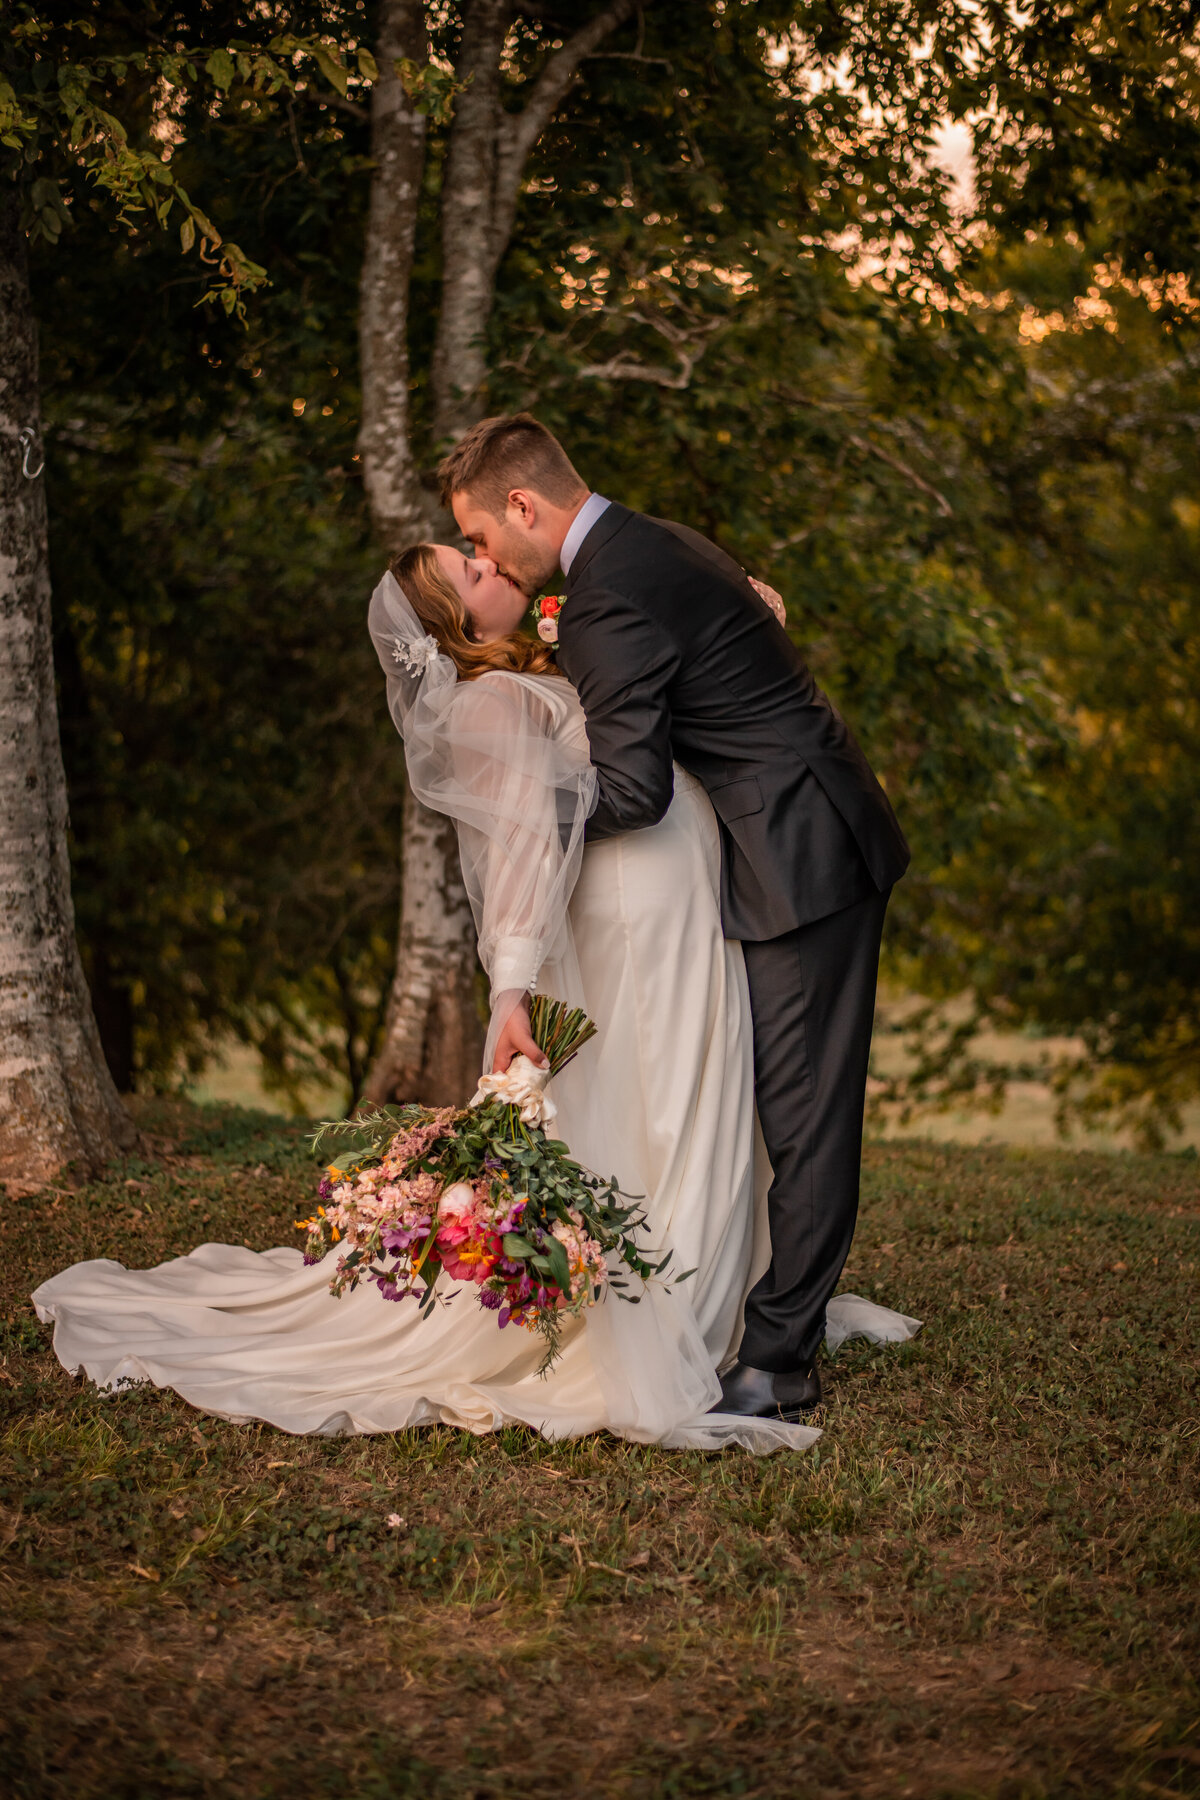 Photographer based in the Texas Hill country specializing in weddings, equine, senior graduates and more